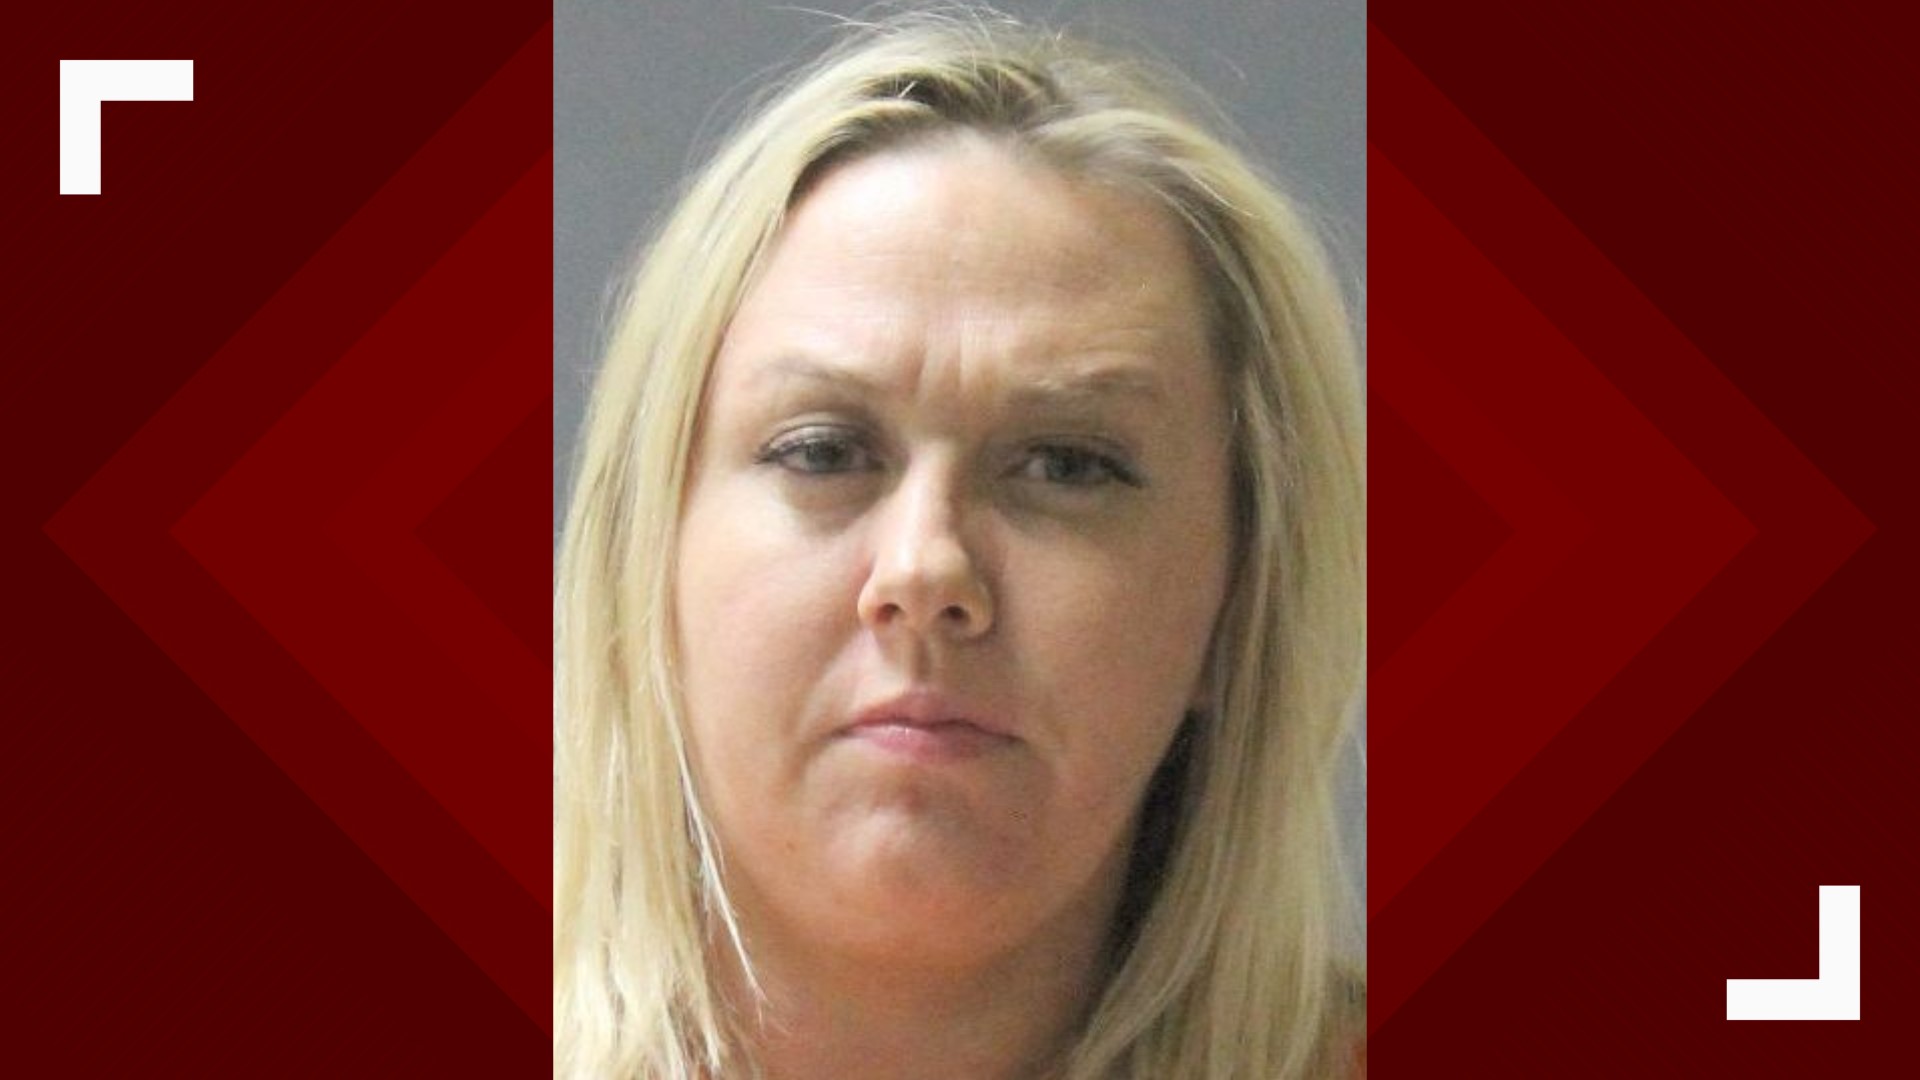 Amber Manning was indicted on several charges.